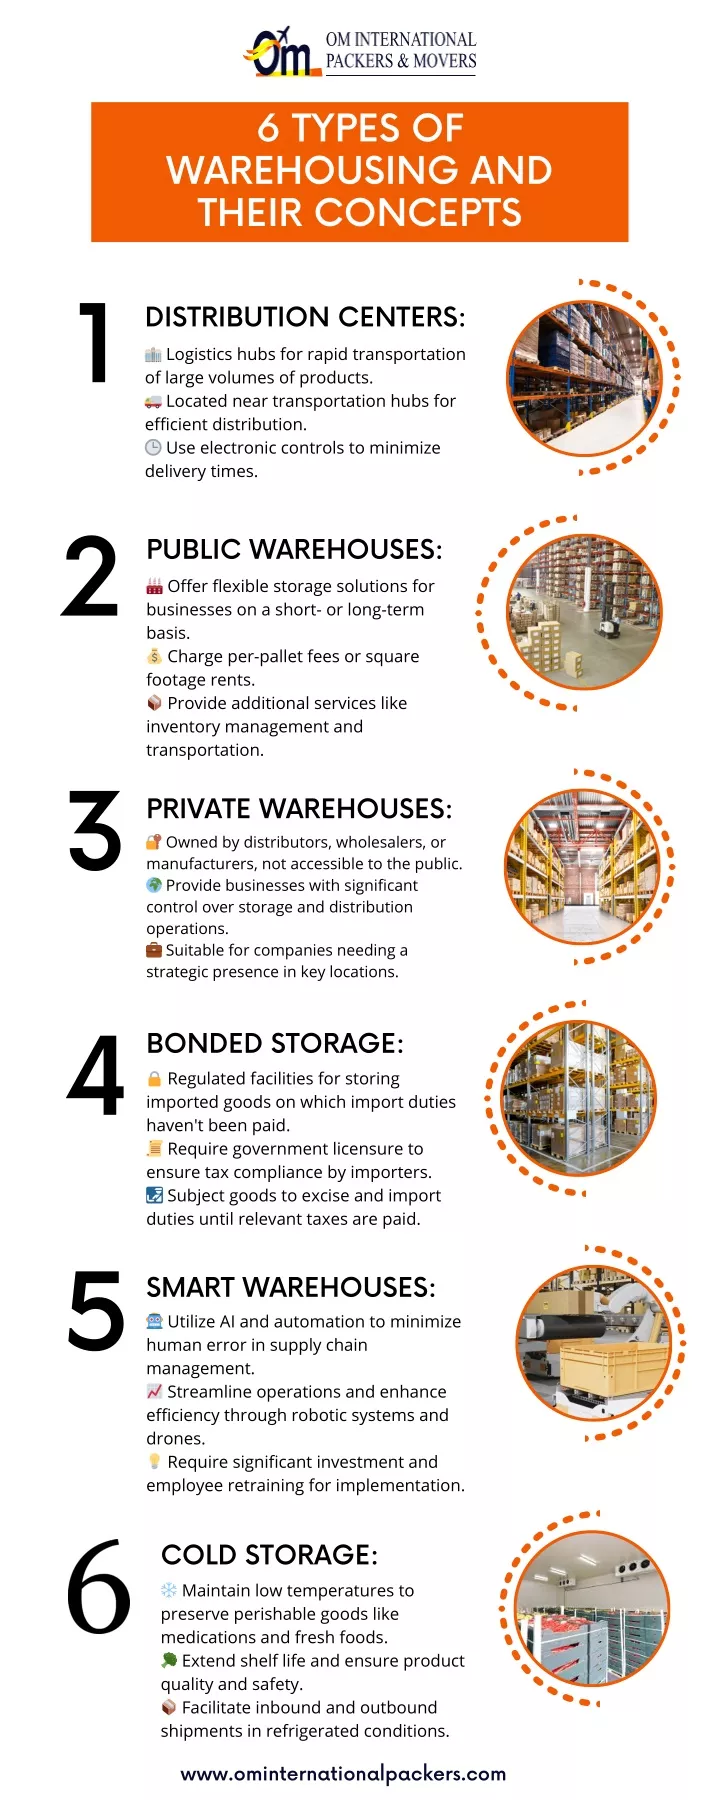 6 types of warehousing and their concepts